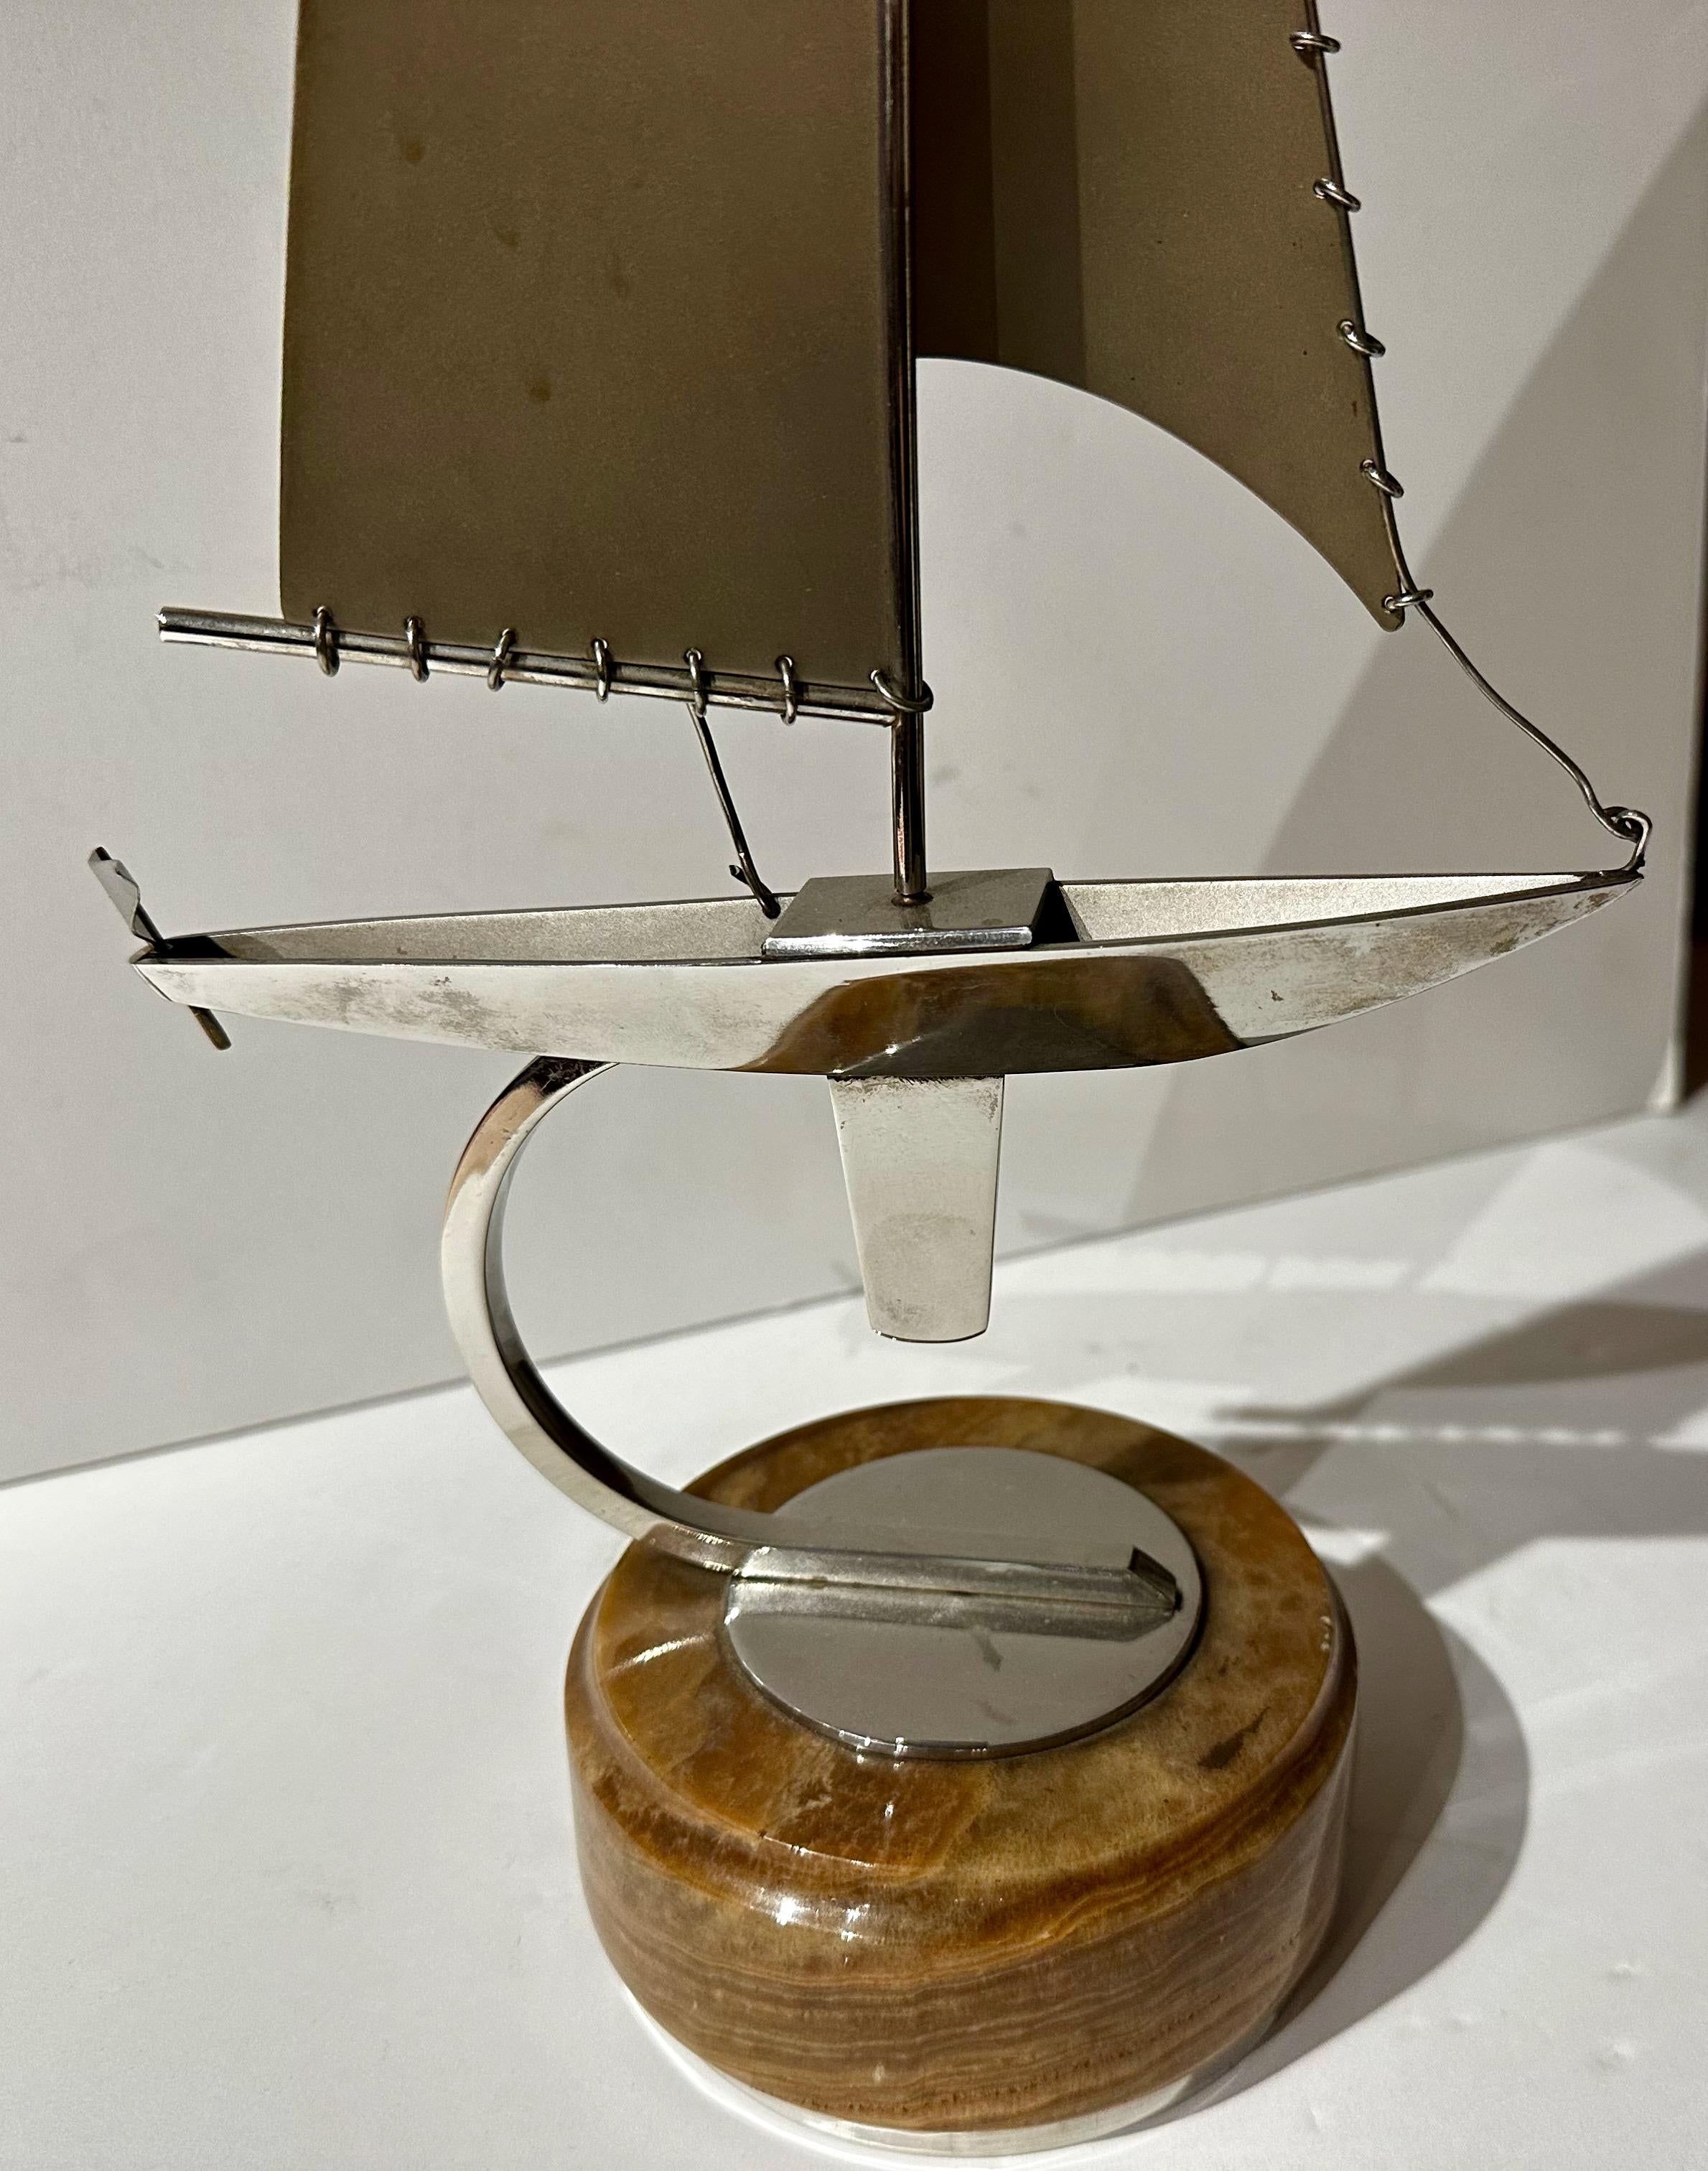 Art Deco Sailboat Model mixed metals and wood. Excellent construction and outstanding model design. The finish is near perfect. The metal sails are all detailed with round rings for support and style. This high-quality ship is simple but elegant as